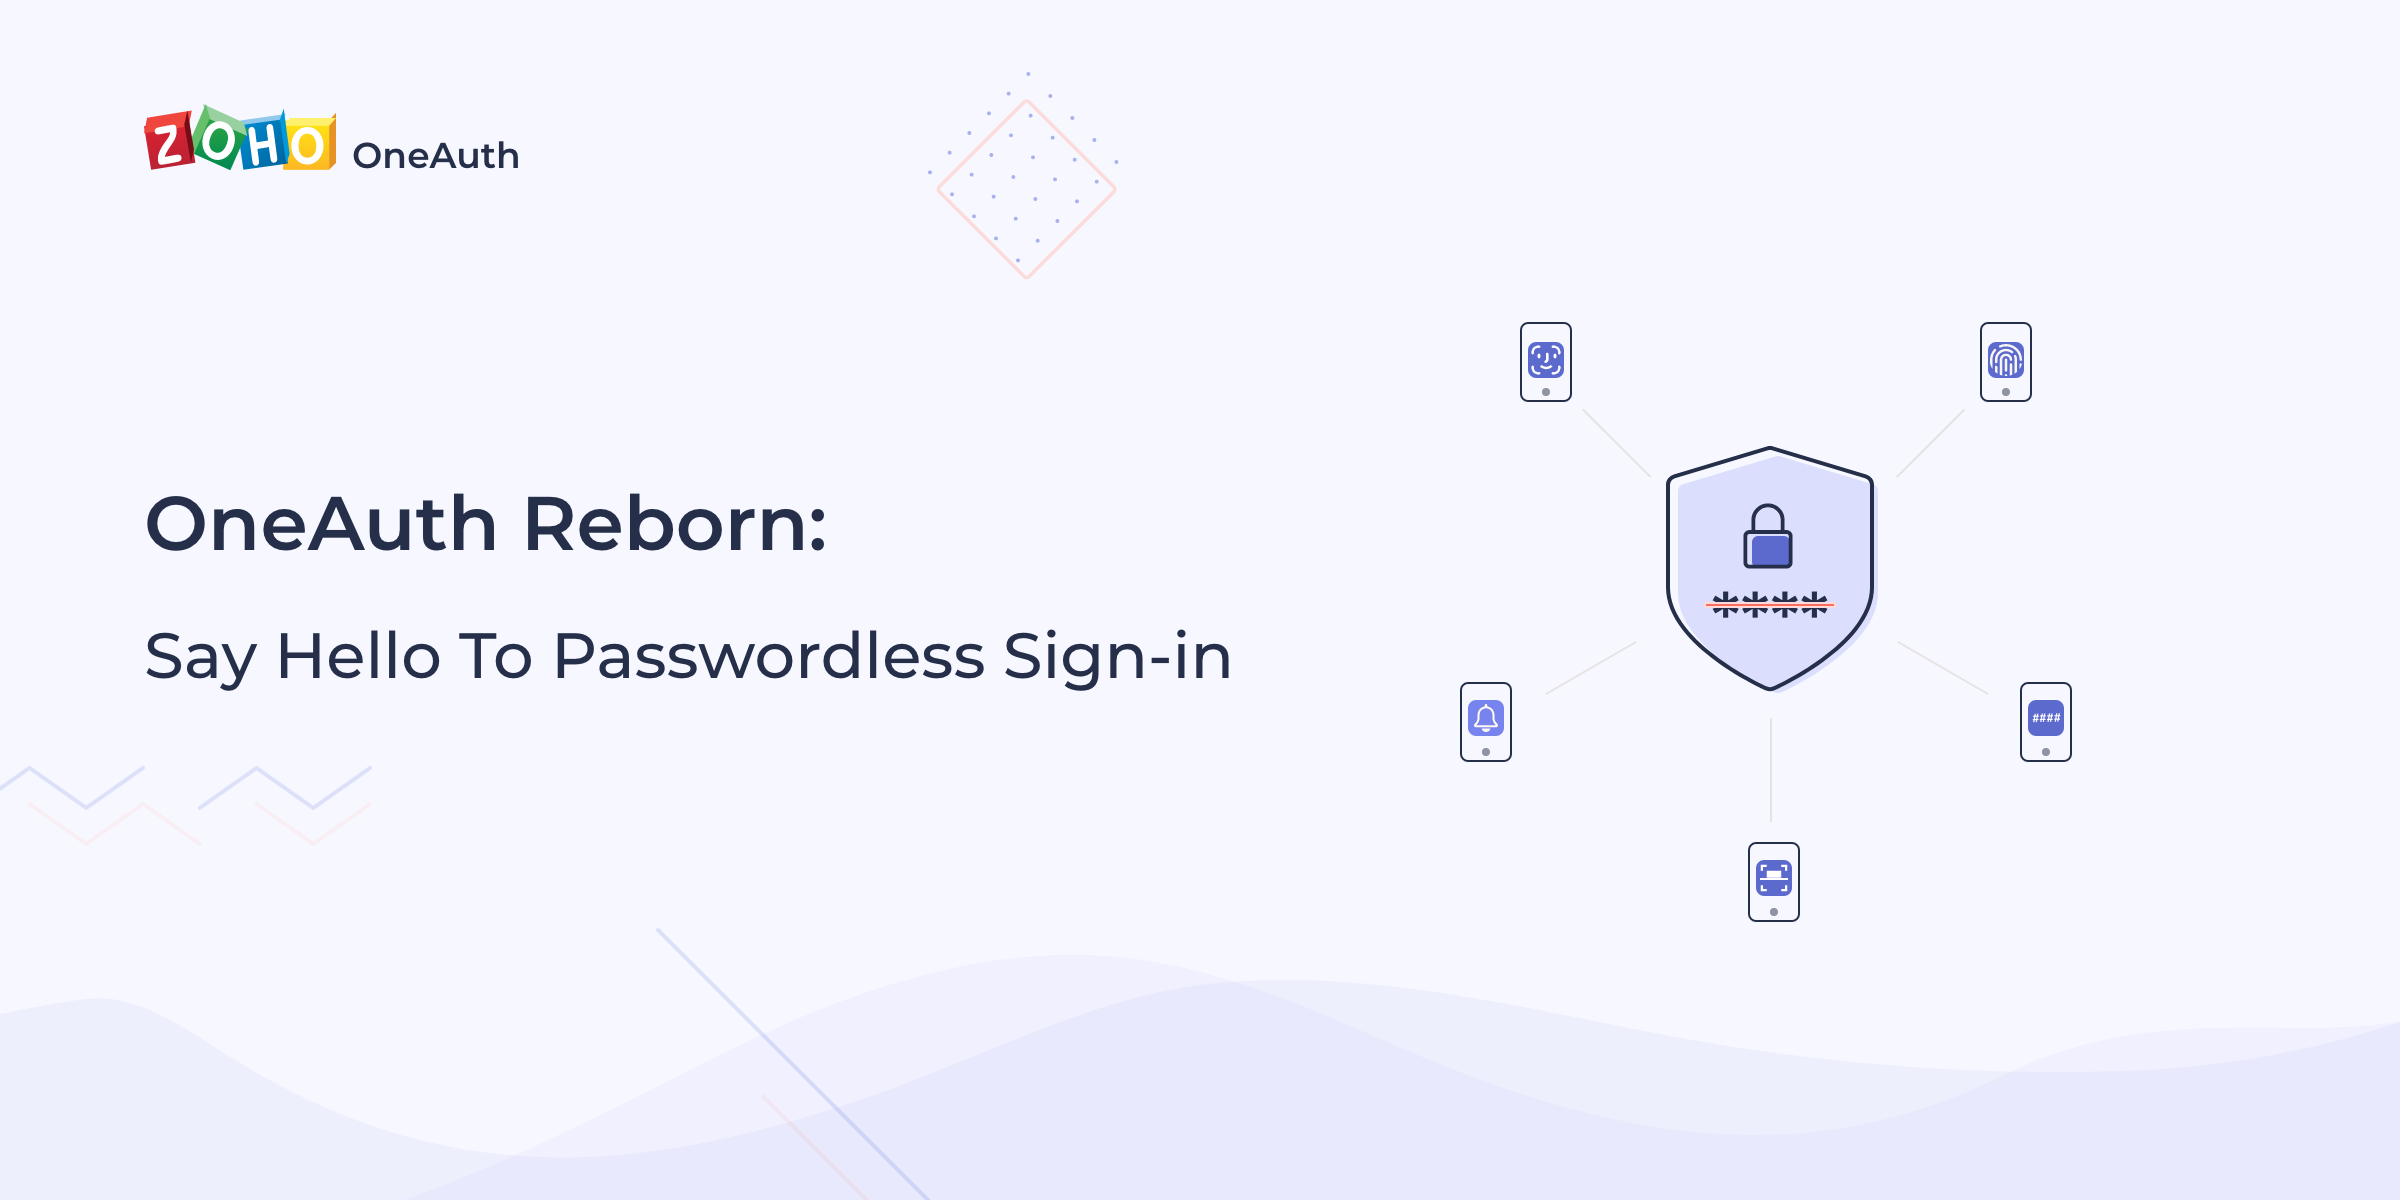 OneAuth Reborn: Say Hello To Passwordless Sign-in